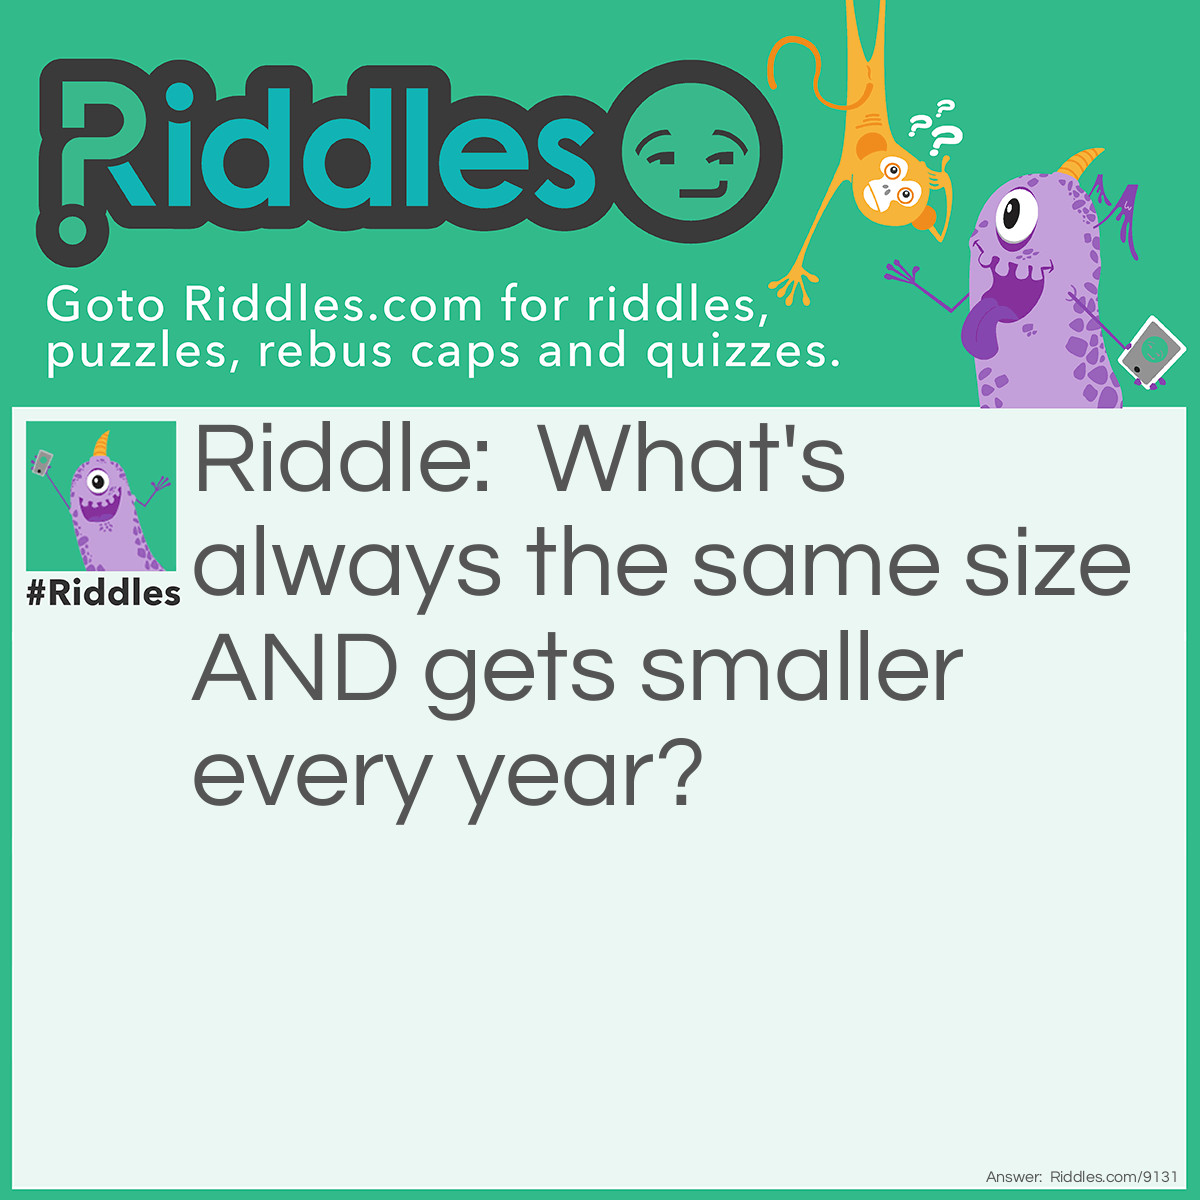 Riddle: What's always the same size AND gets smaller every year? Answer: Detroit.